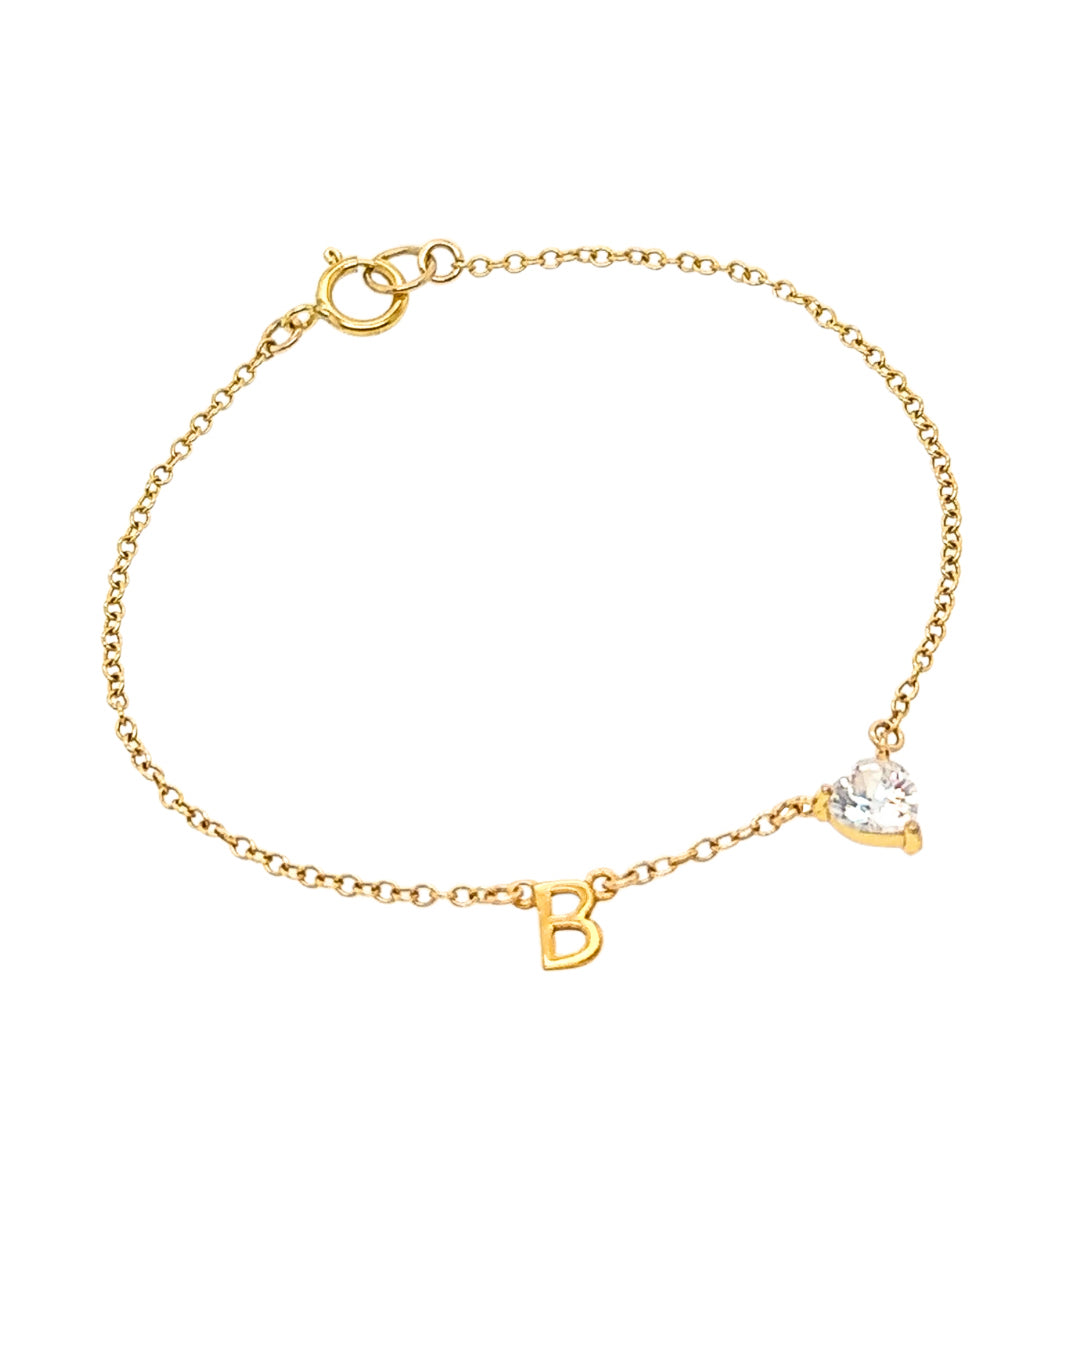 Customizable gold petite initial name bracelet with the option to add up to 5 letters, gems or heart